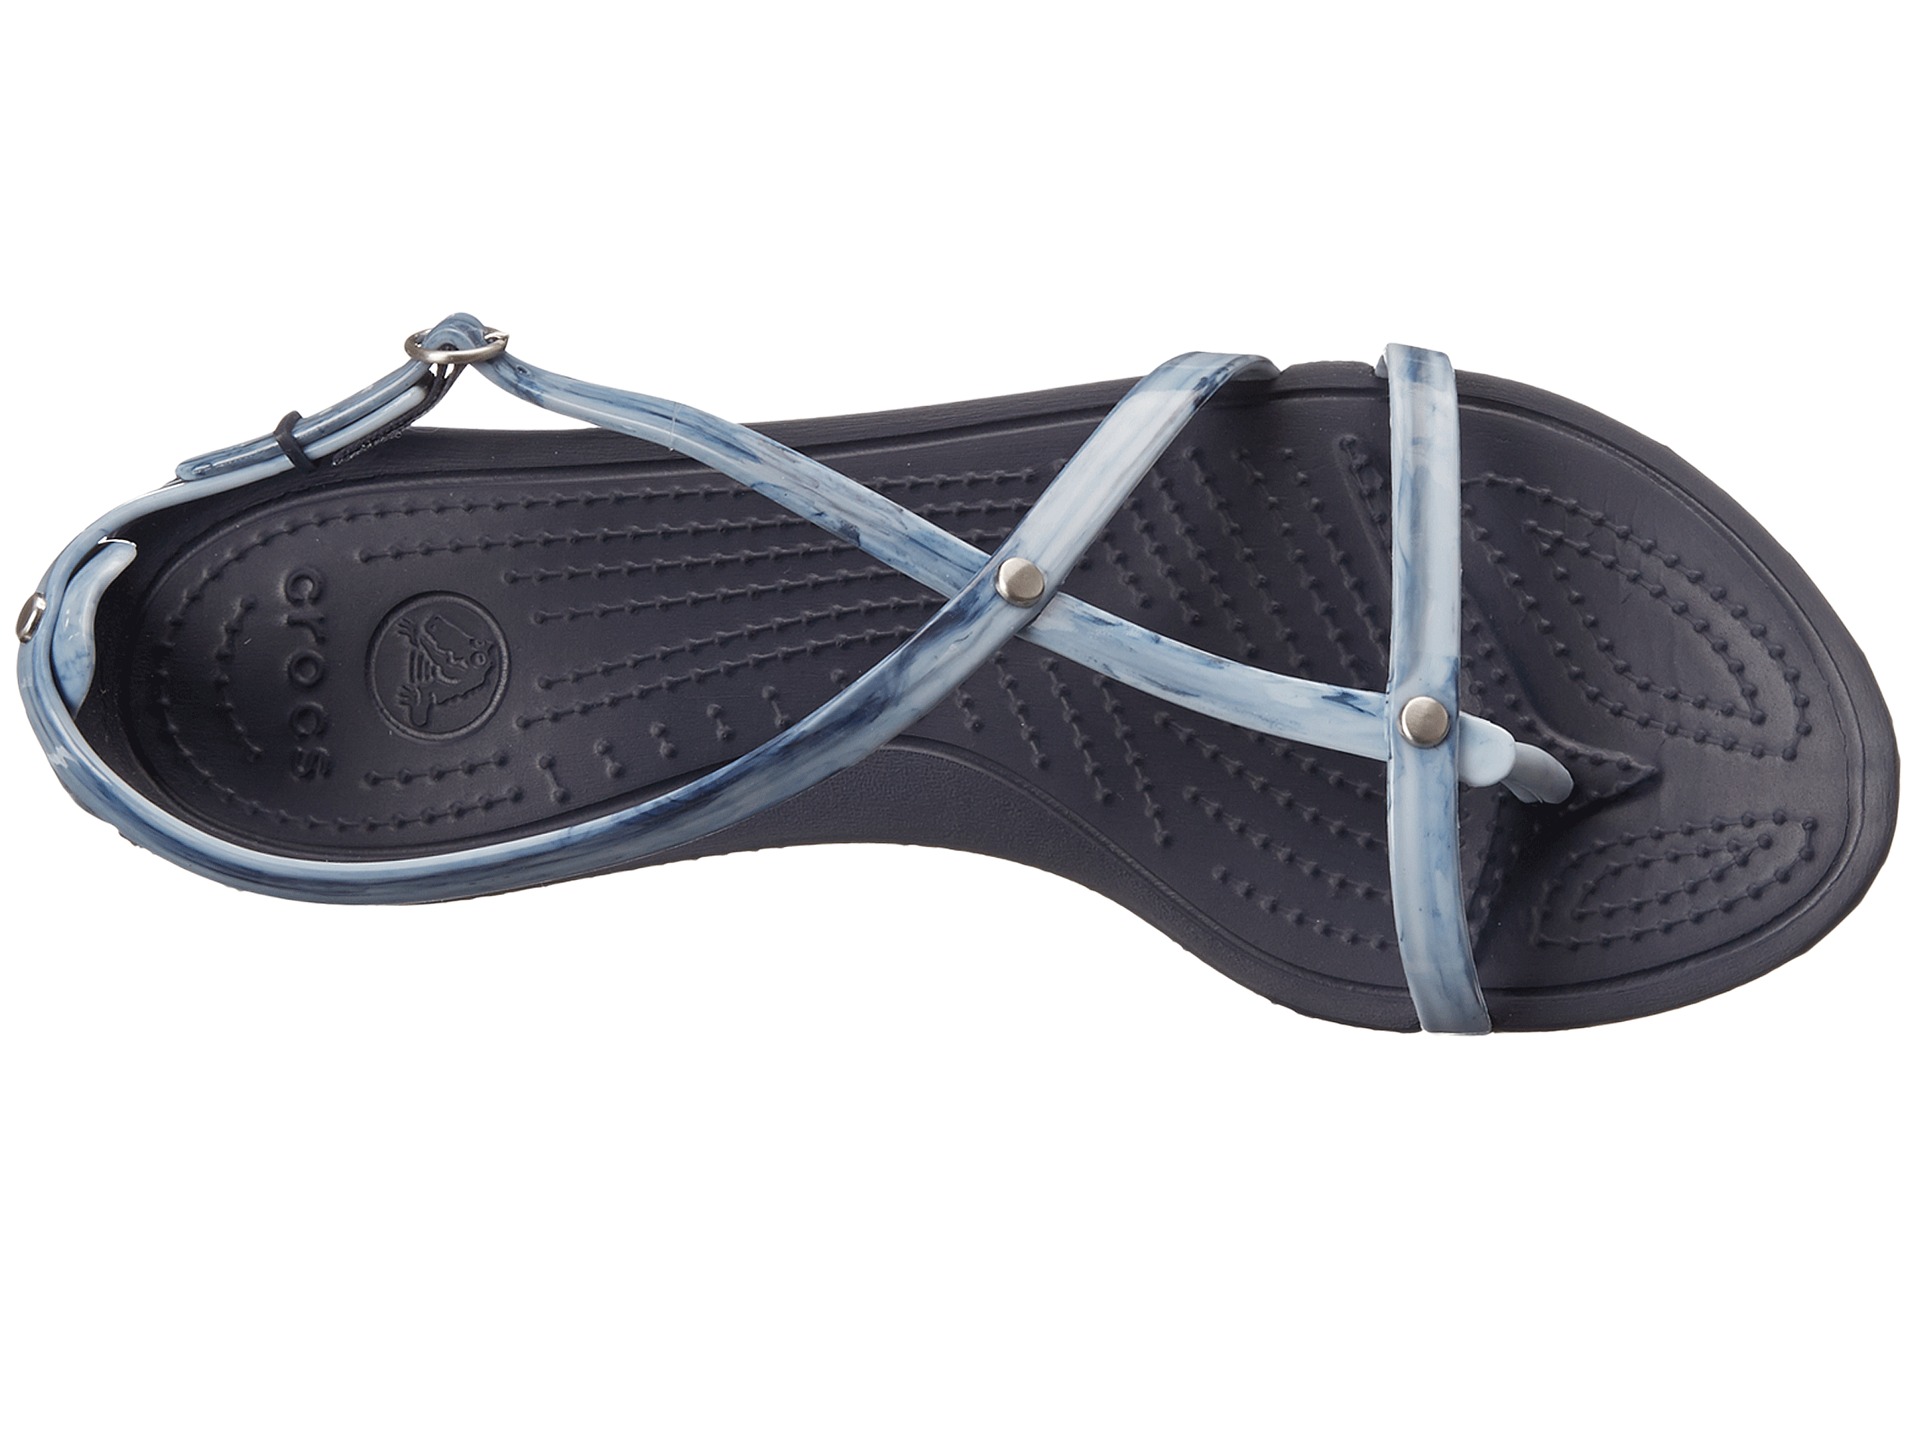 Crocs Really Sexi Marbled Flip Sandal White/Navy/Navy - Zappos.com Free ...